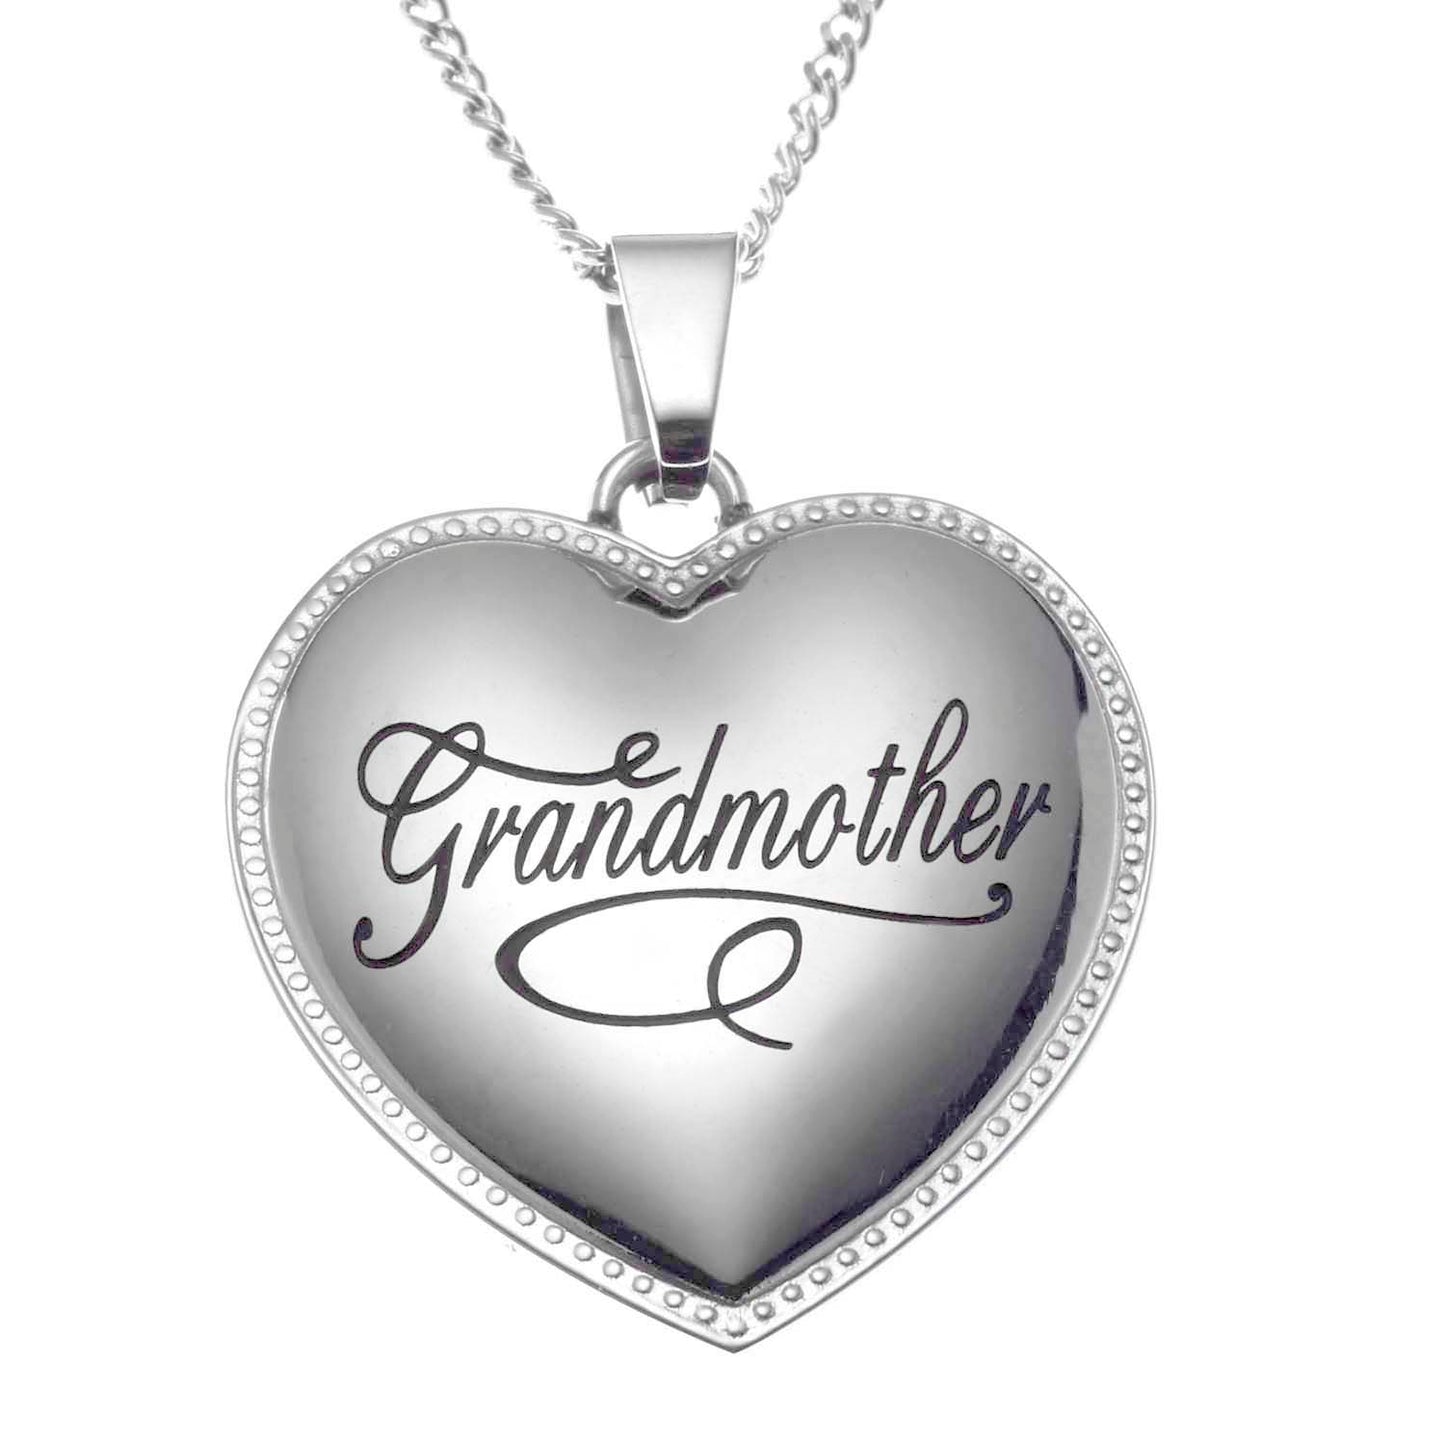 Stainless Steel Scripted Heart "Grandmother" Pendant Necklace - Sentimental Jewelry Gift for Grandma